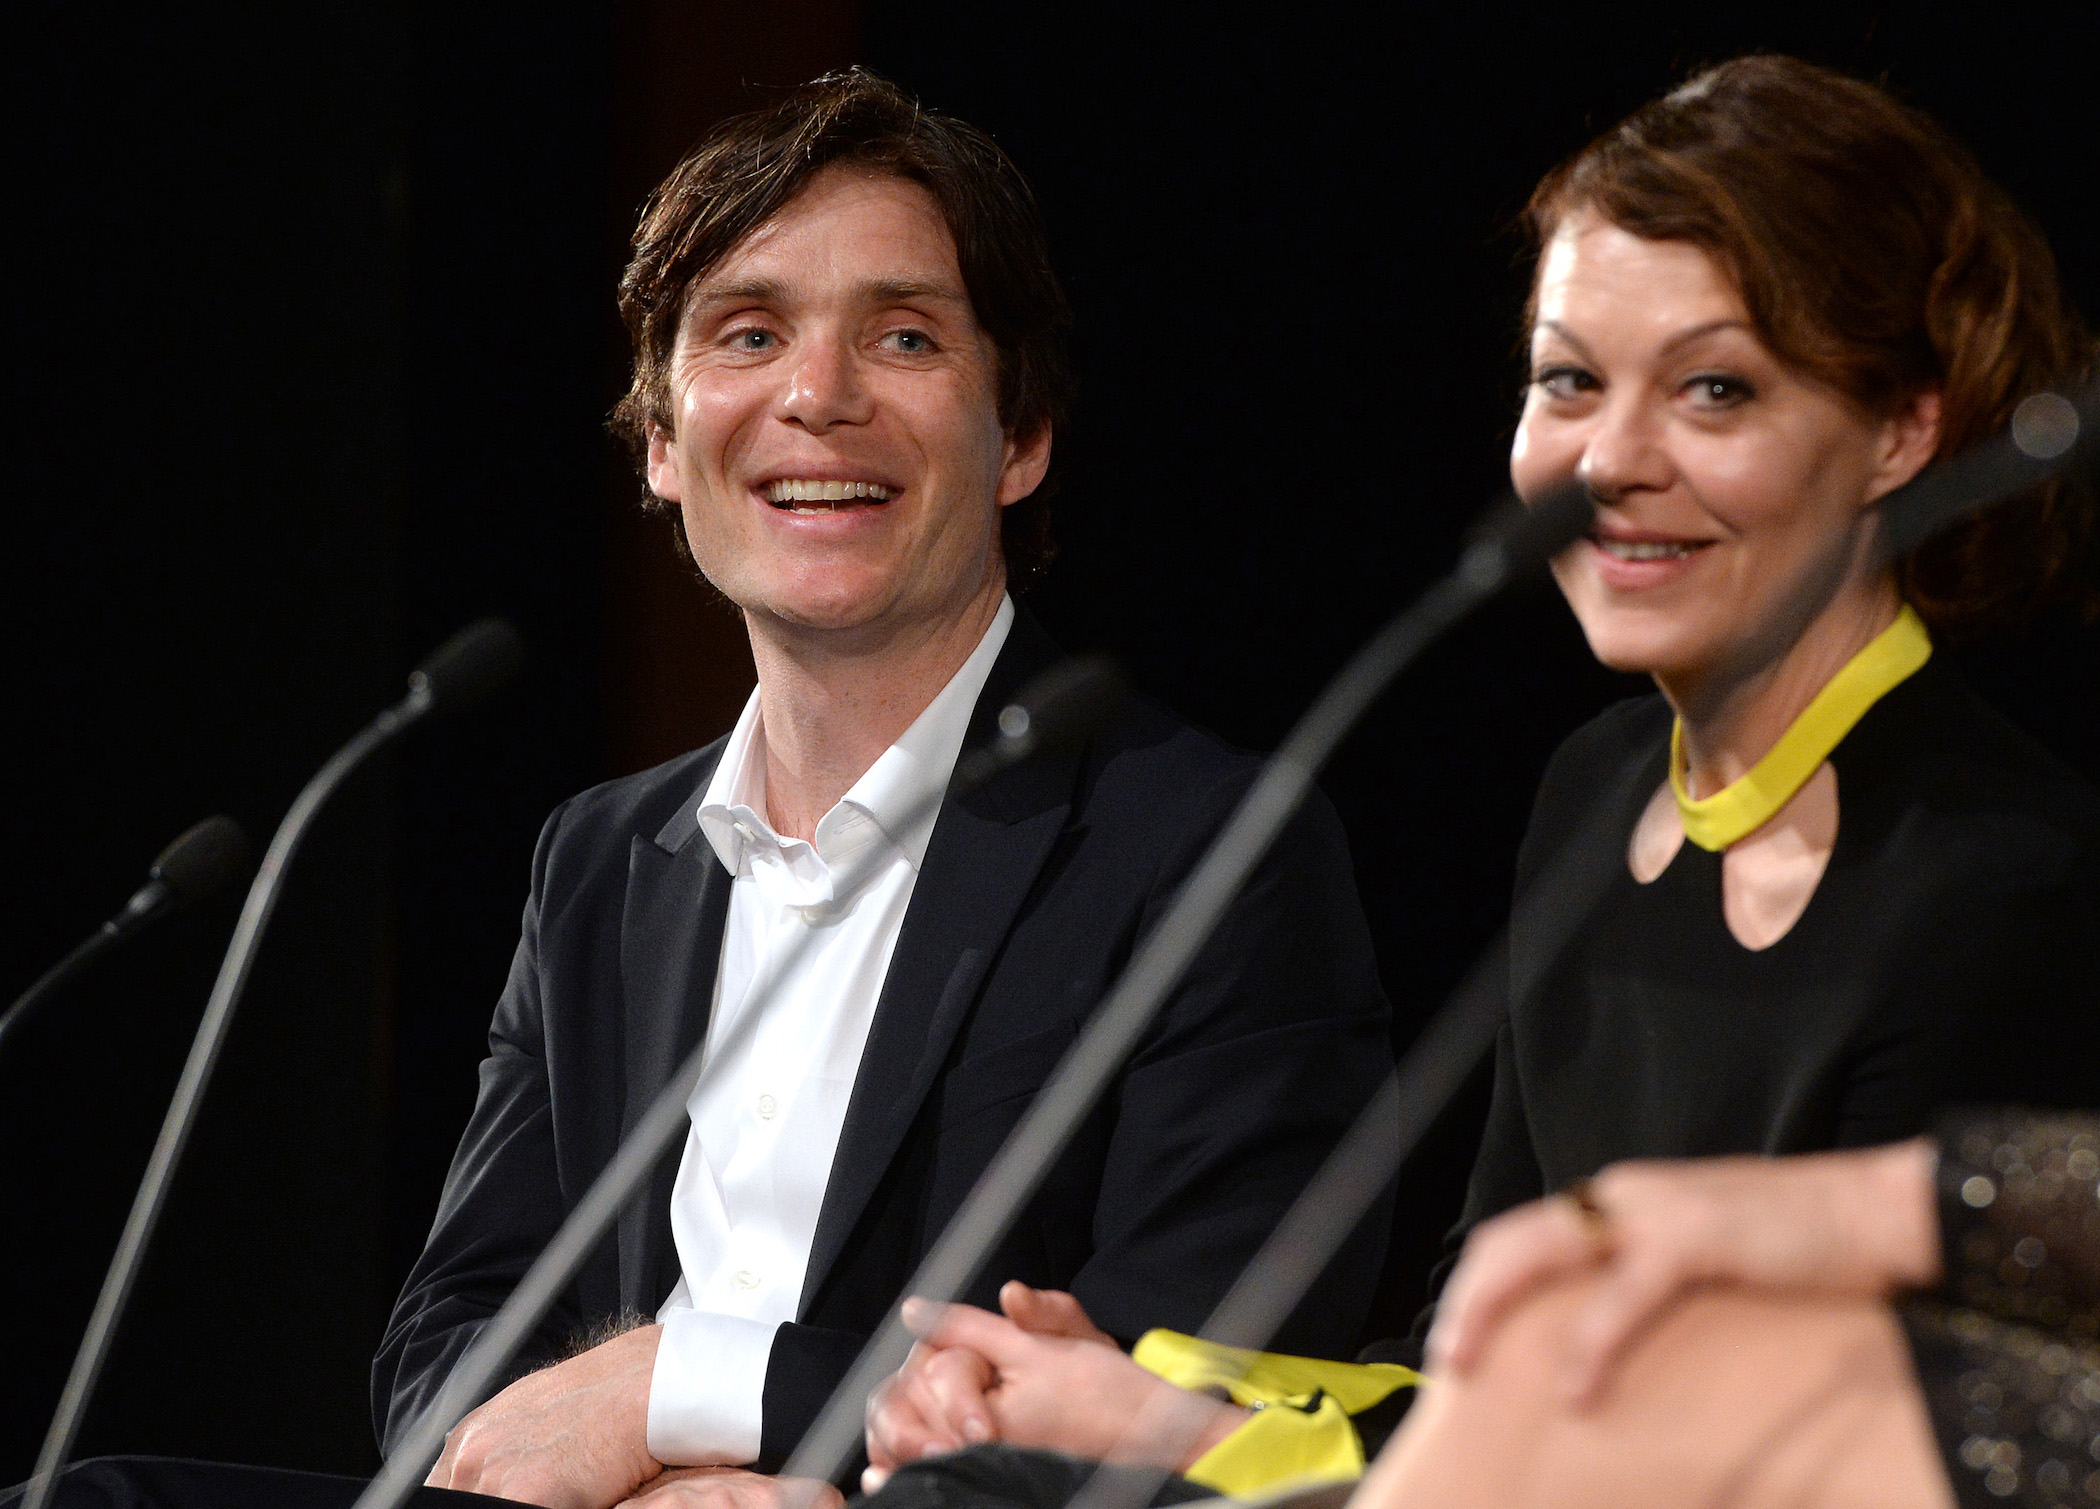 Cillian Murphy from 'Peaky Blinders' Season 6 and Helen McCrory sitting and answering questions